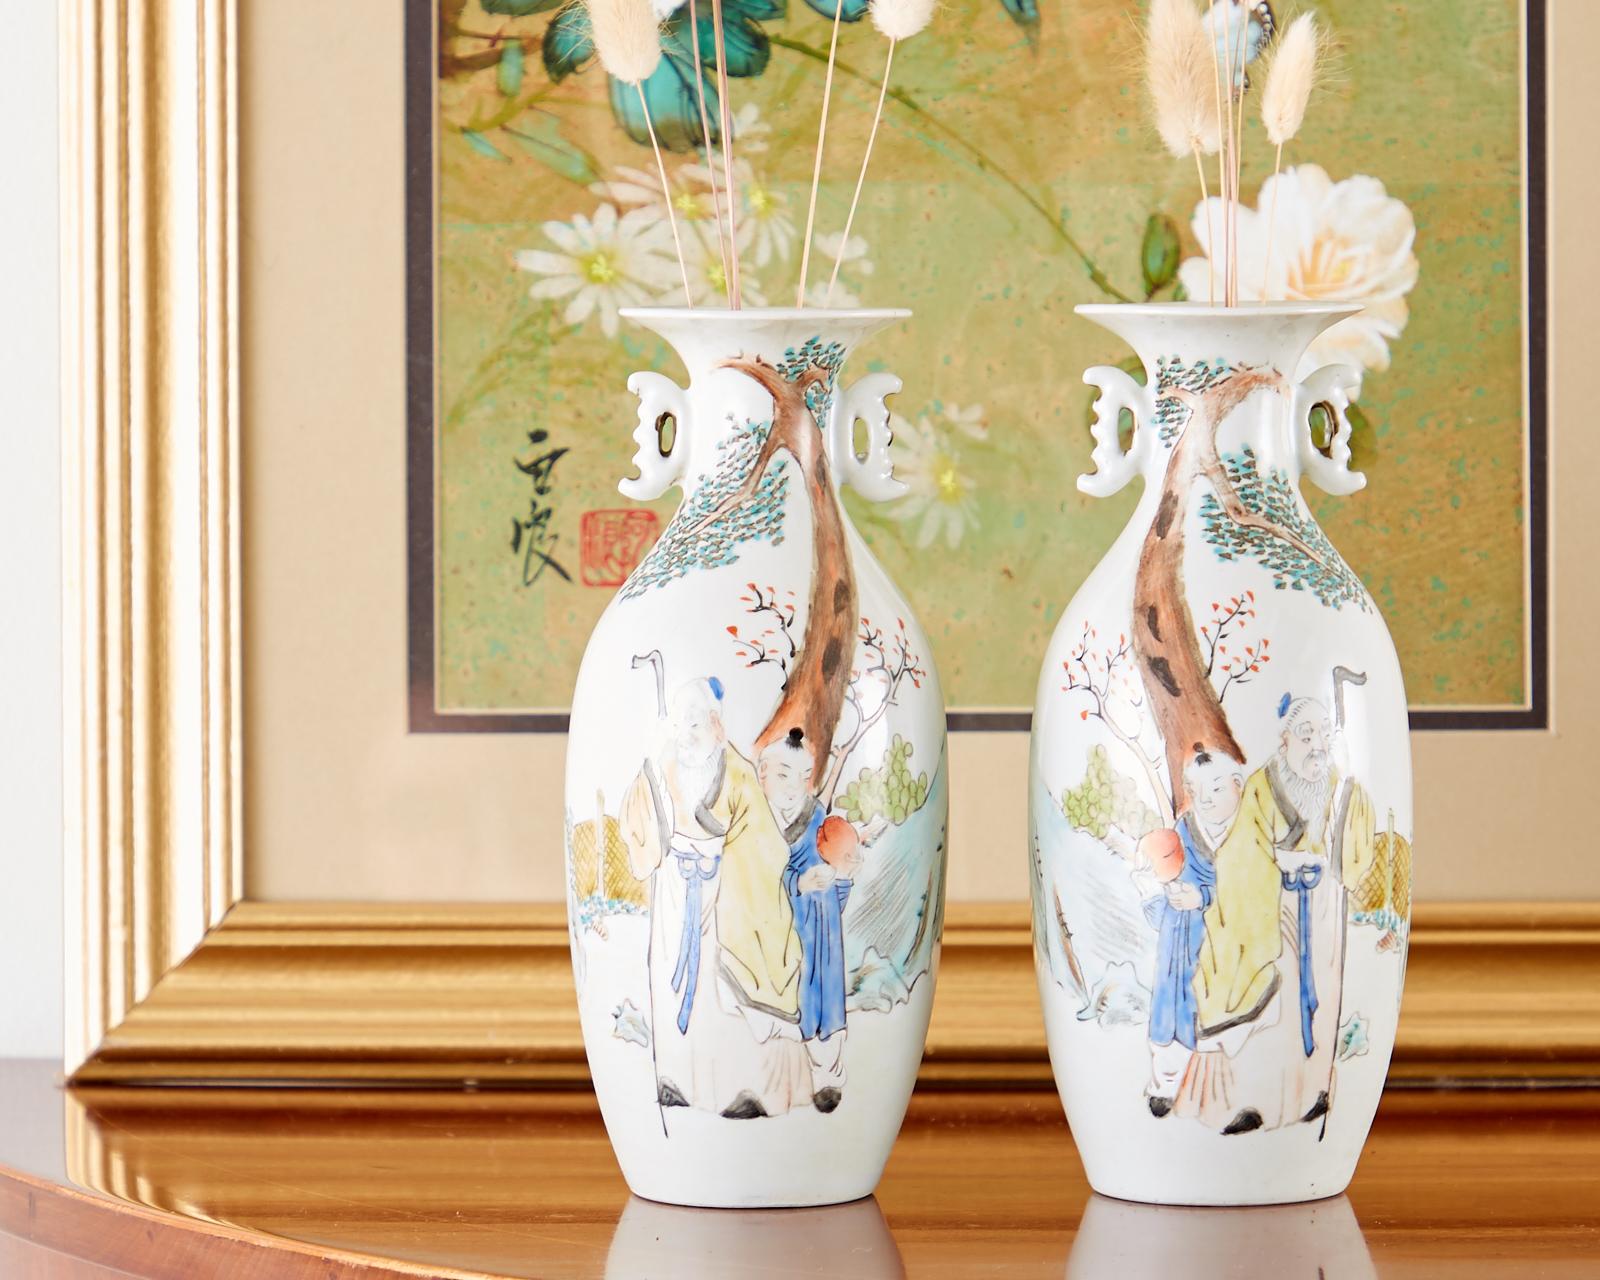 Remarkable pair of diminutive Chinese porcelain Fencai vases featuring beautifully decorated landscape scenes. Vibrant famille rose colors depict a scholar and his attendant offering him a peach with a pine tree and waterfall in the background. Each